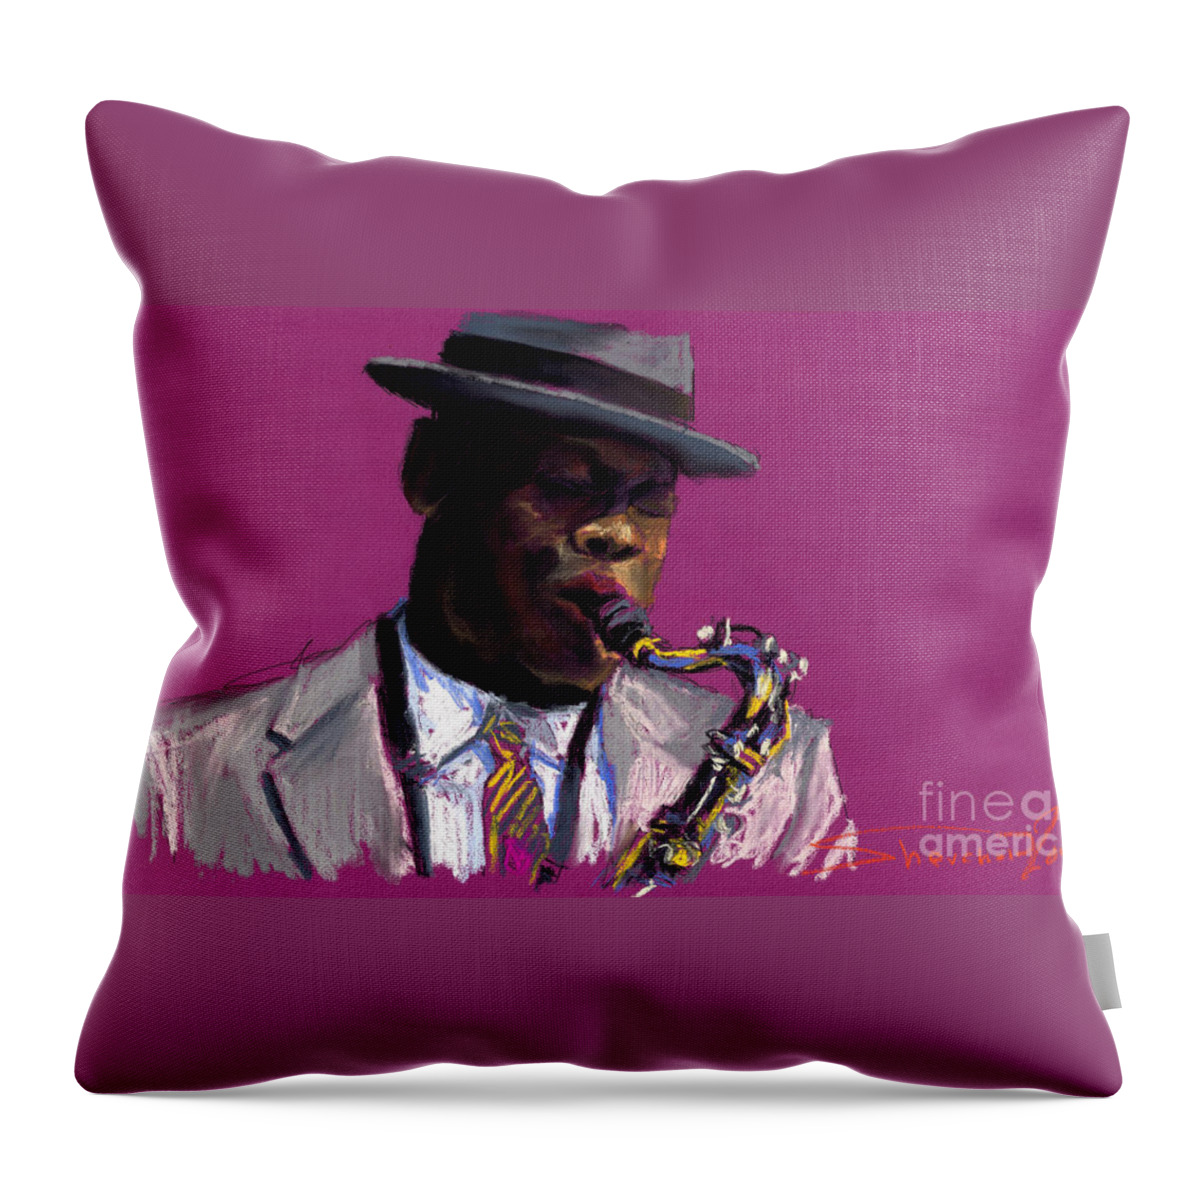 Jazz Throw Pillow featuring the painting Jazz Saxophonist by Yuriy Shevchuk